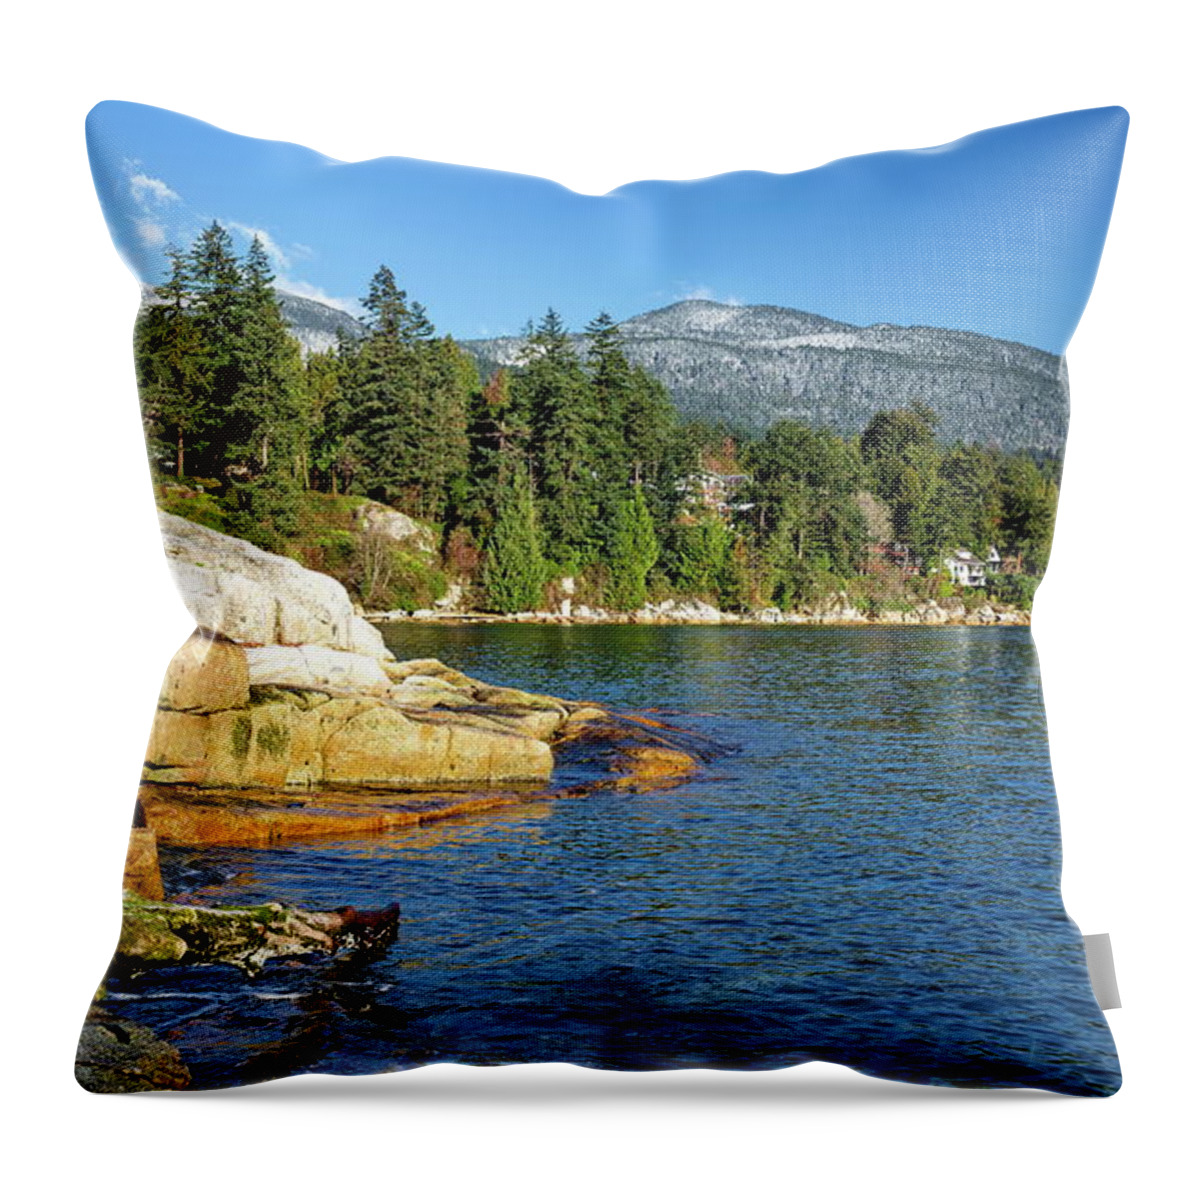 Alex Lyubar Throw Pillow featuring the pyrography Shore of the northern sea against the backdrop of a mountain ridge by Alex Lyubar